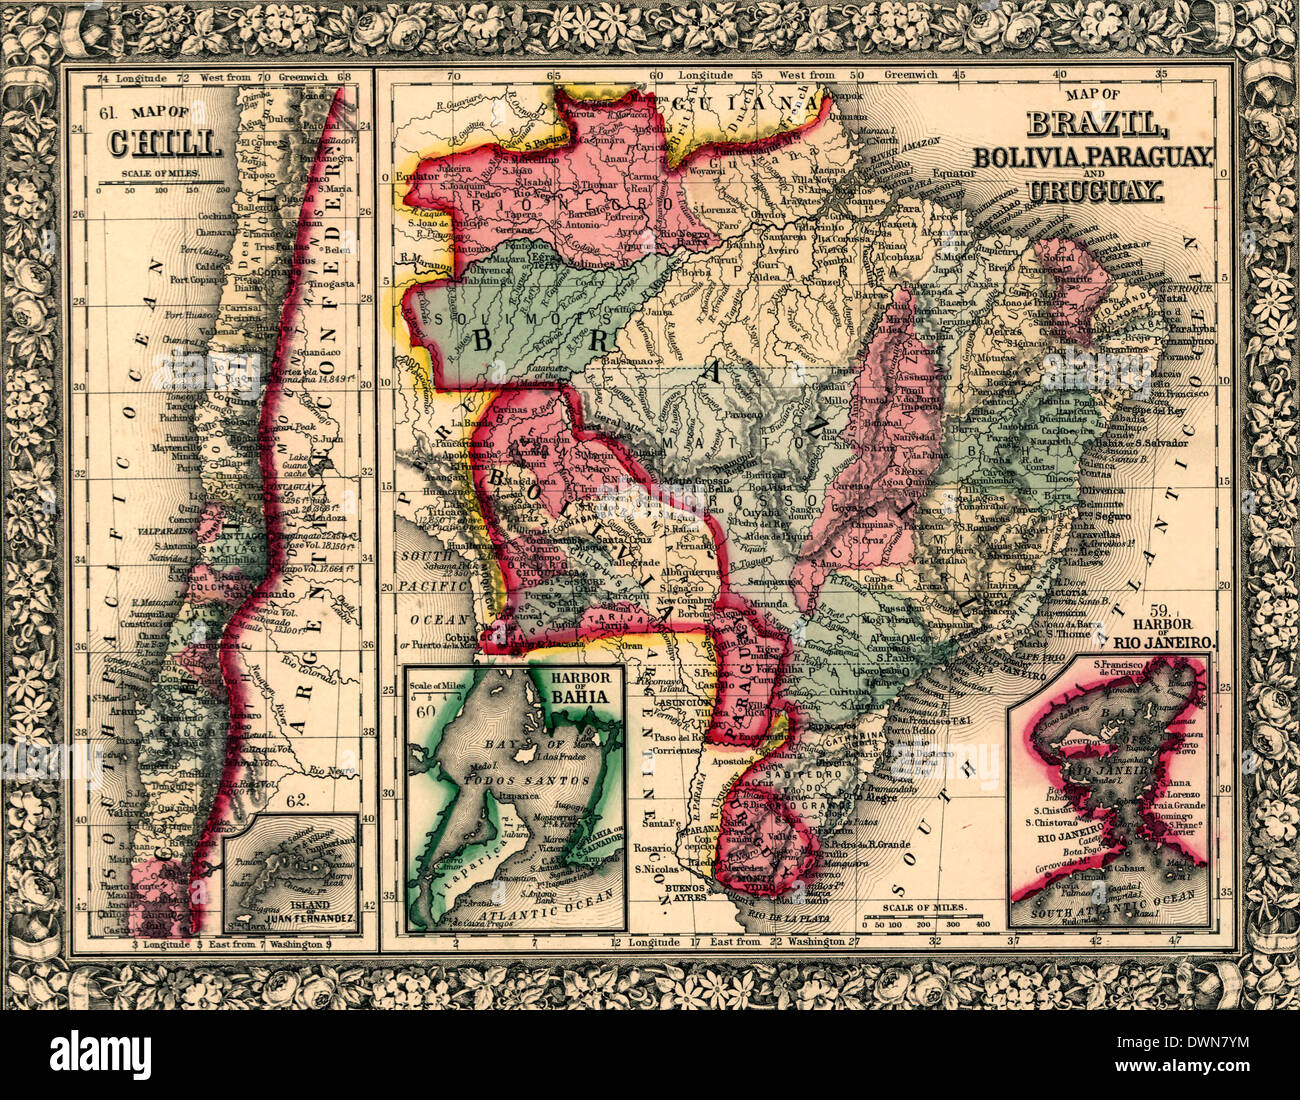 Maps Map of Brazil, Bolivia, Paraguay, and Uruguay ; Map of Chile, 1871 Stock Photo